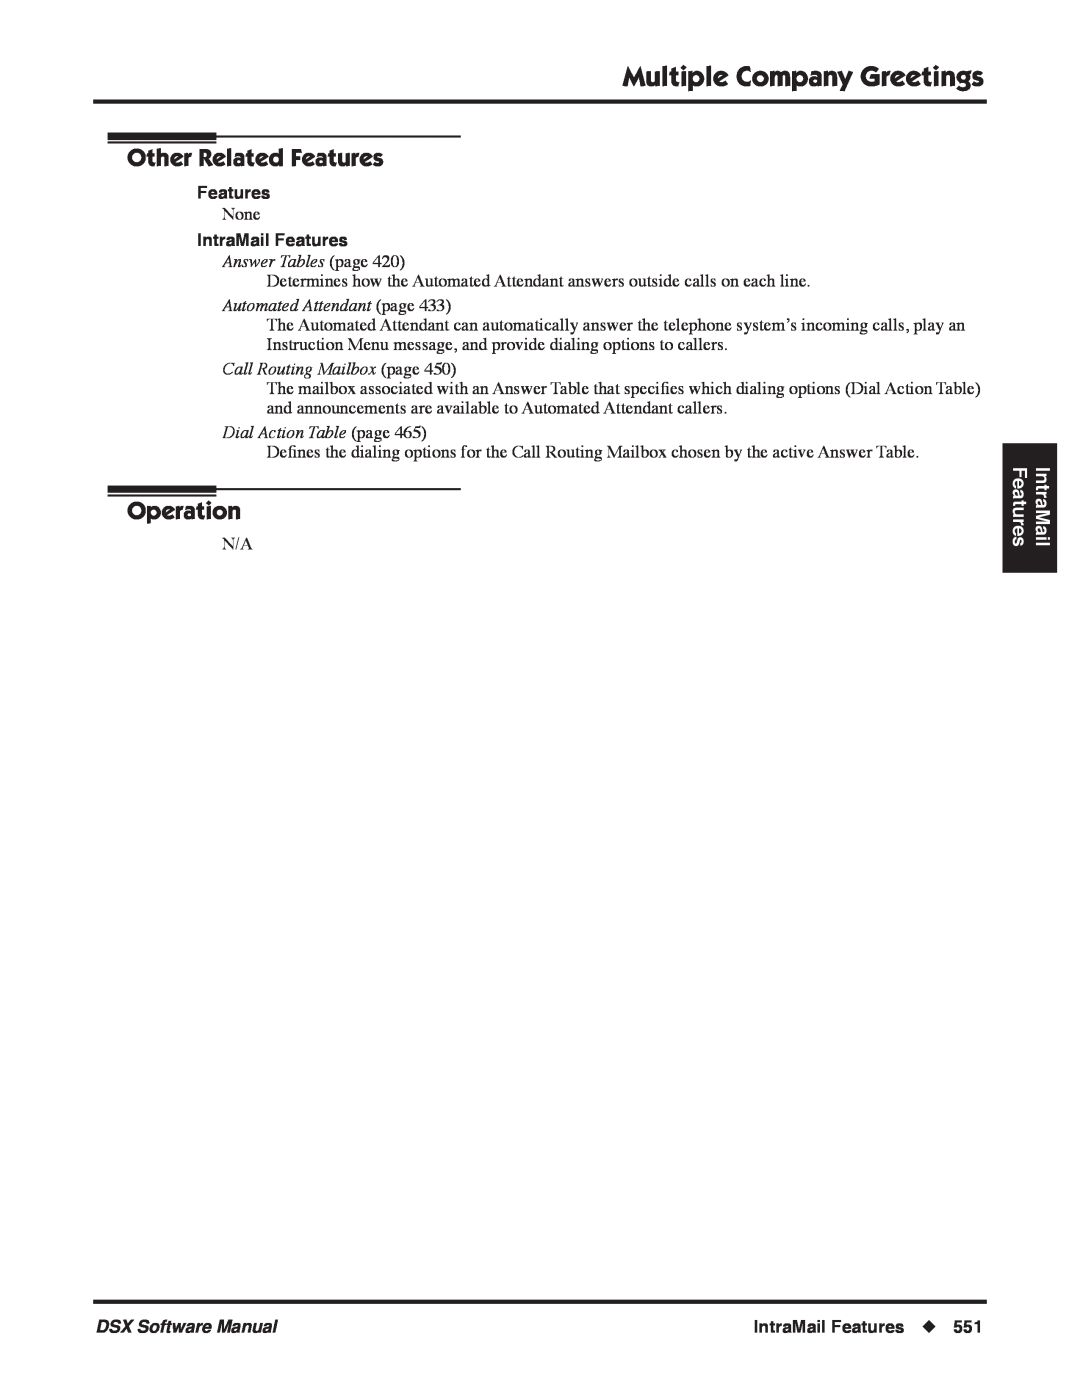 NEC P, N 1093100 Multiple Company Greetings, Other Related Features, Operation, IntraMail Features, Answer Tables page 